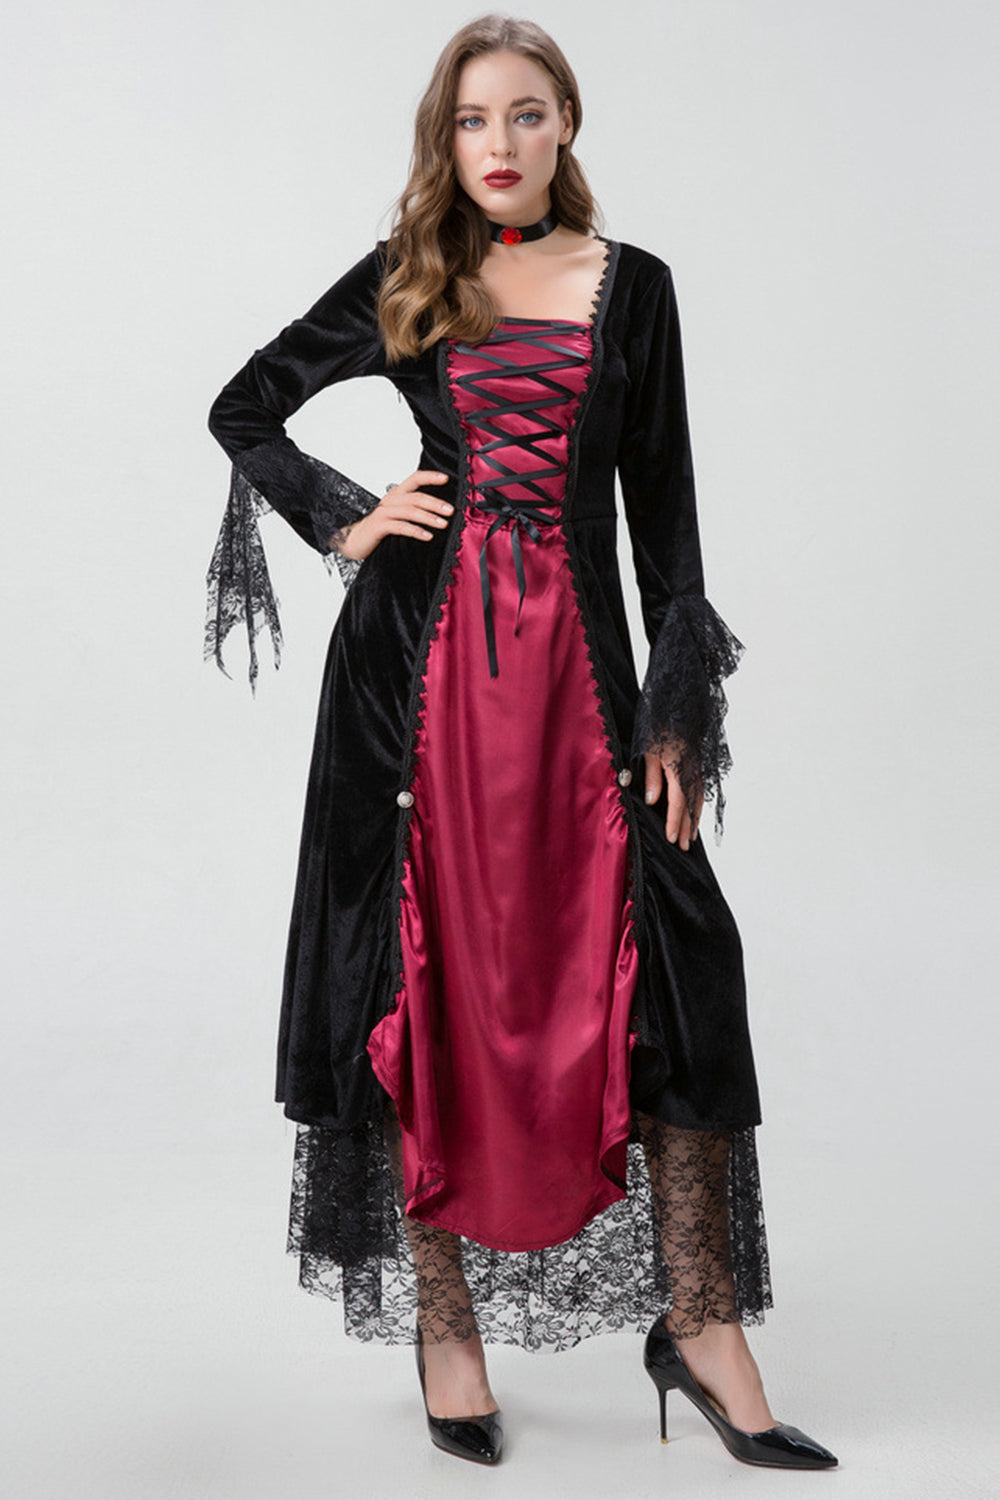 Gothic Burgundy Halloween Dress with Criss Cross Lace